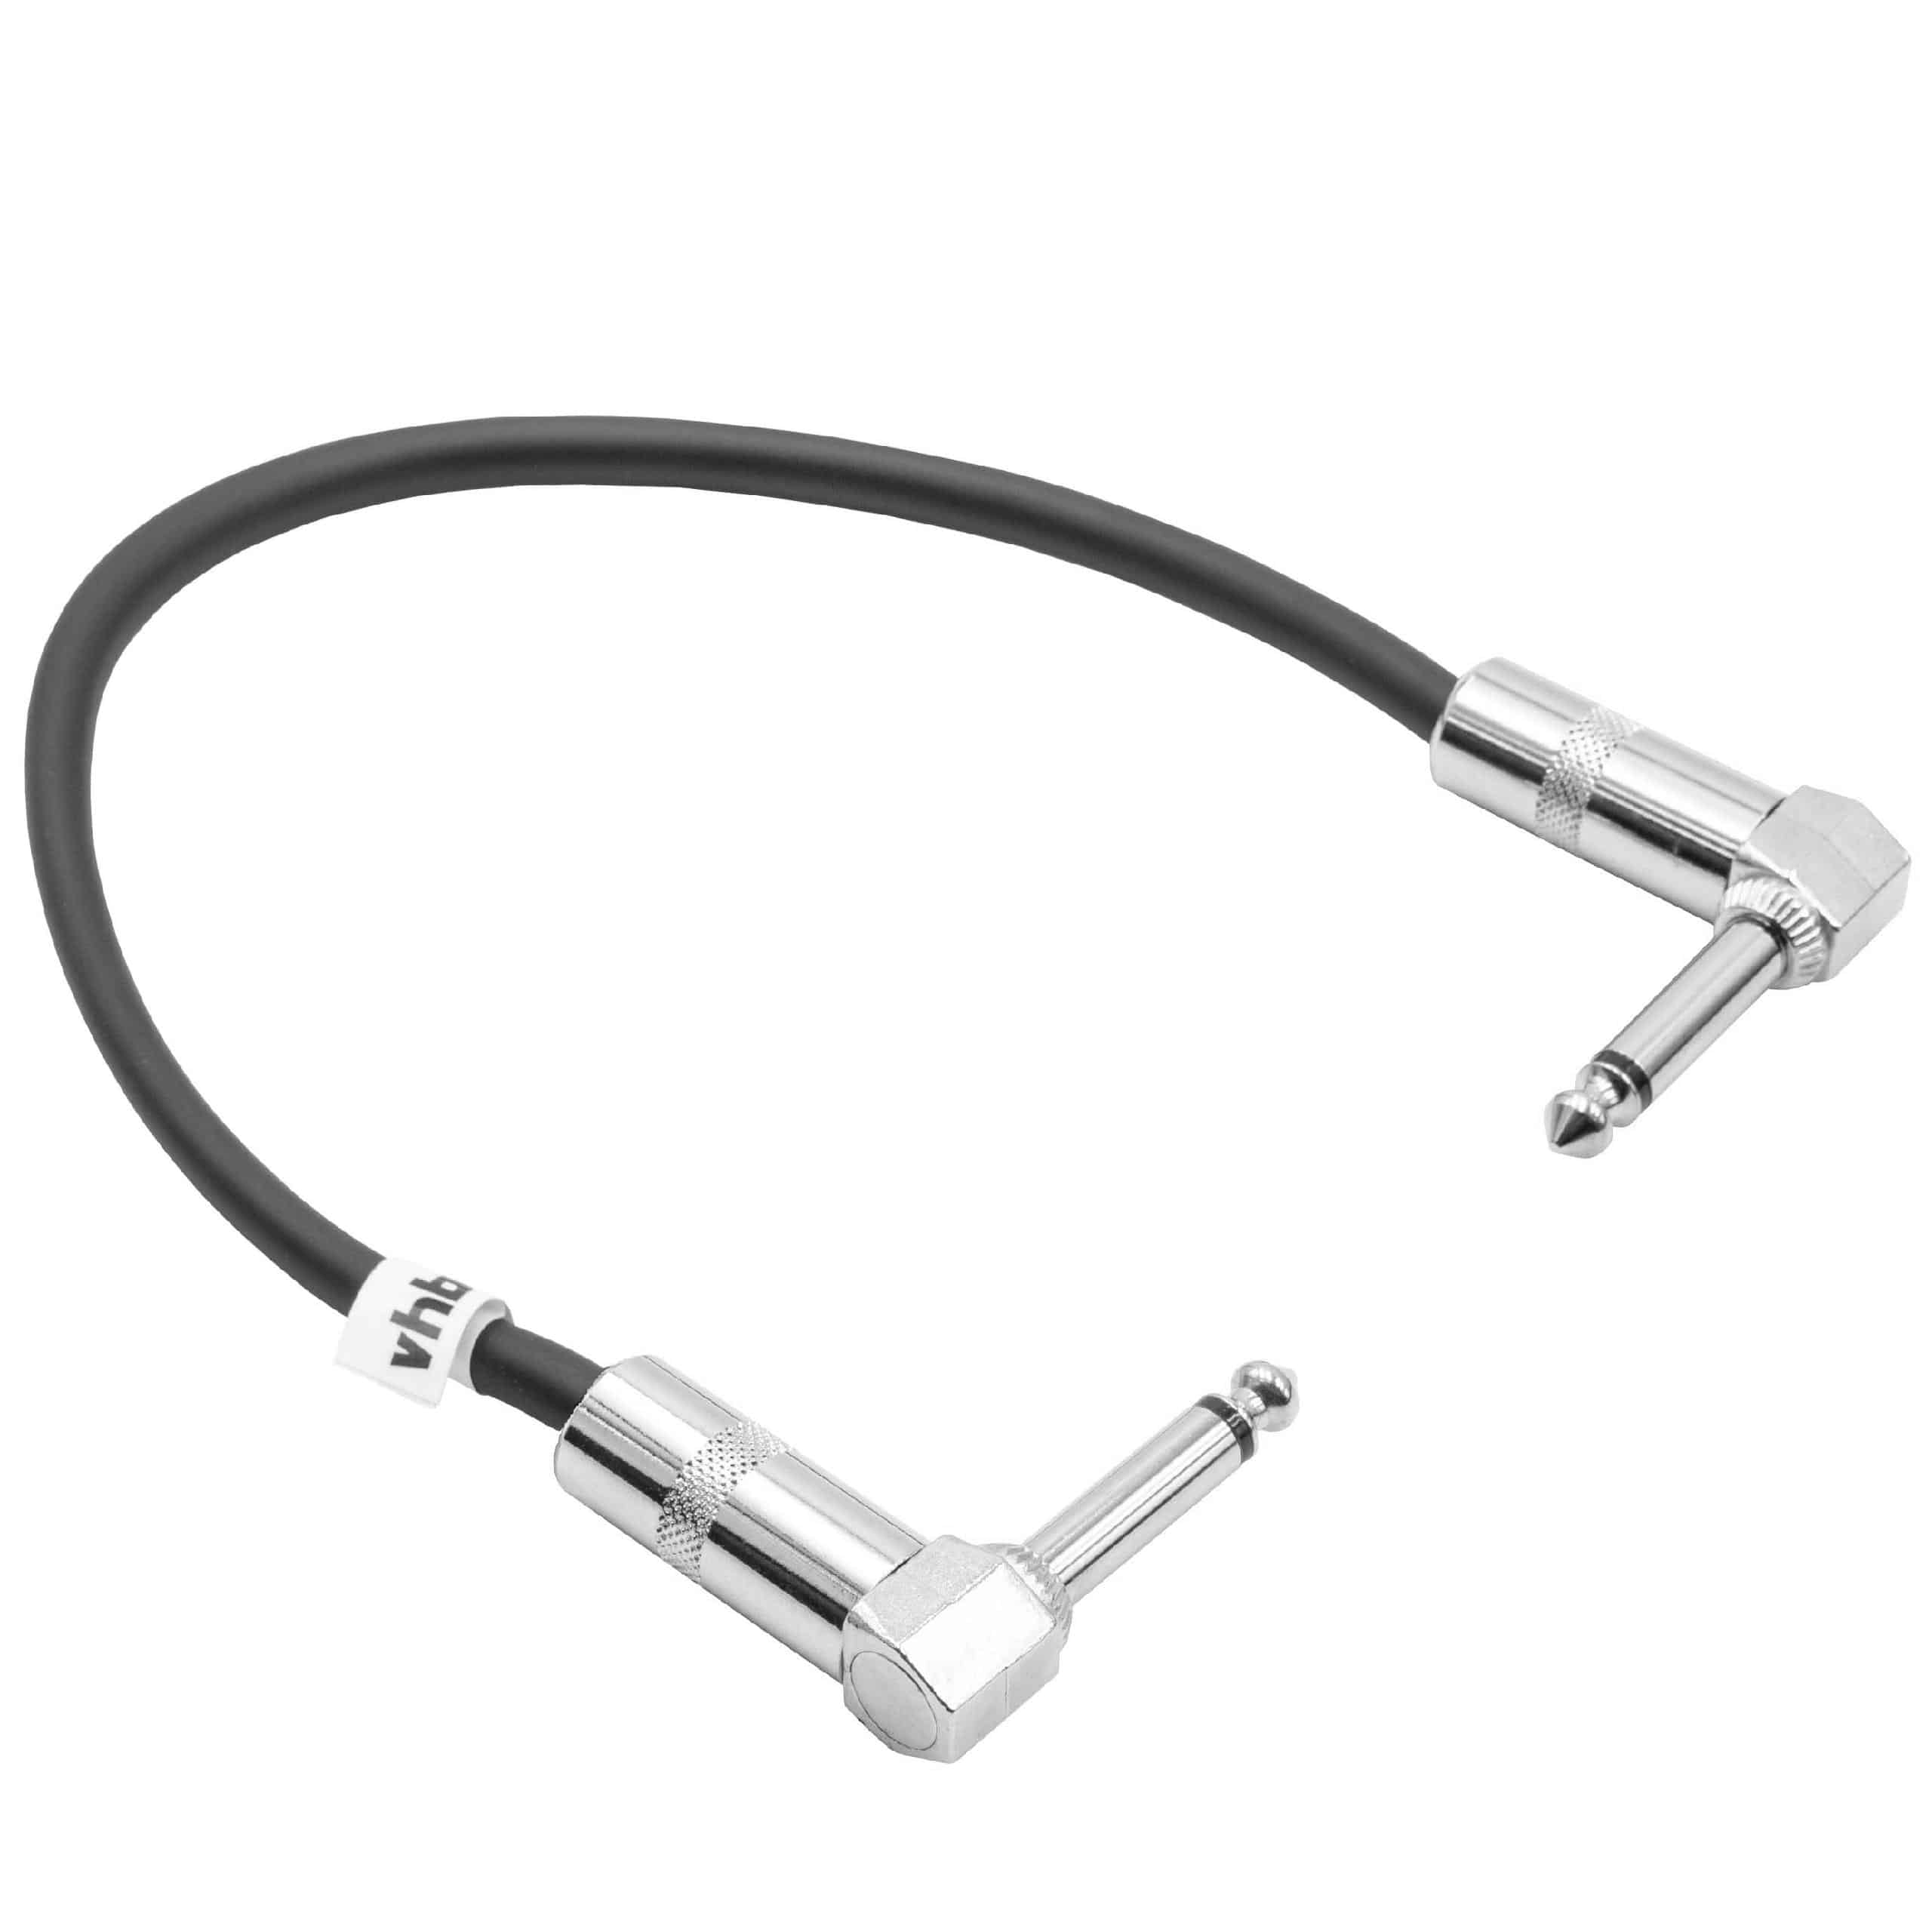 Guitar Patch Cable 30cm Jack Cable for Pedal Board - Patch Cord with 6.3mm Jack Plug, Right Angle, black / sil